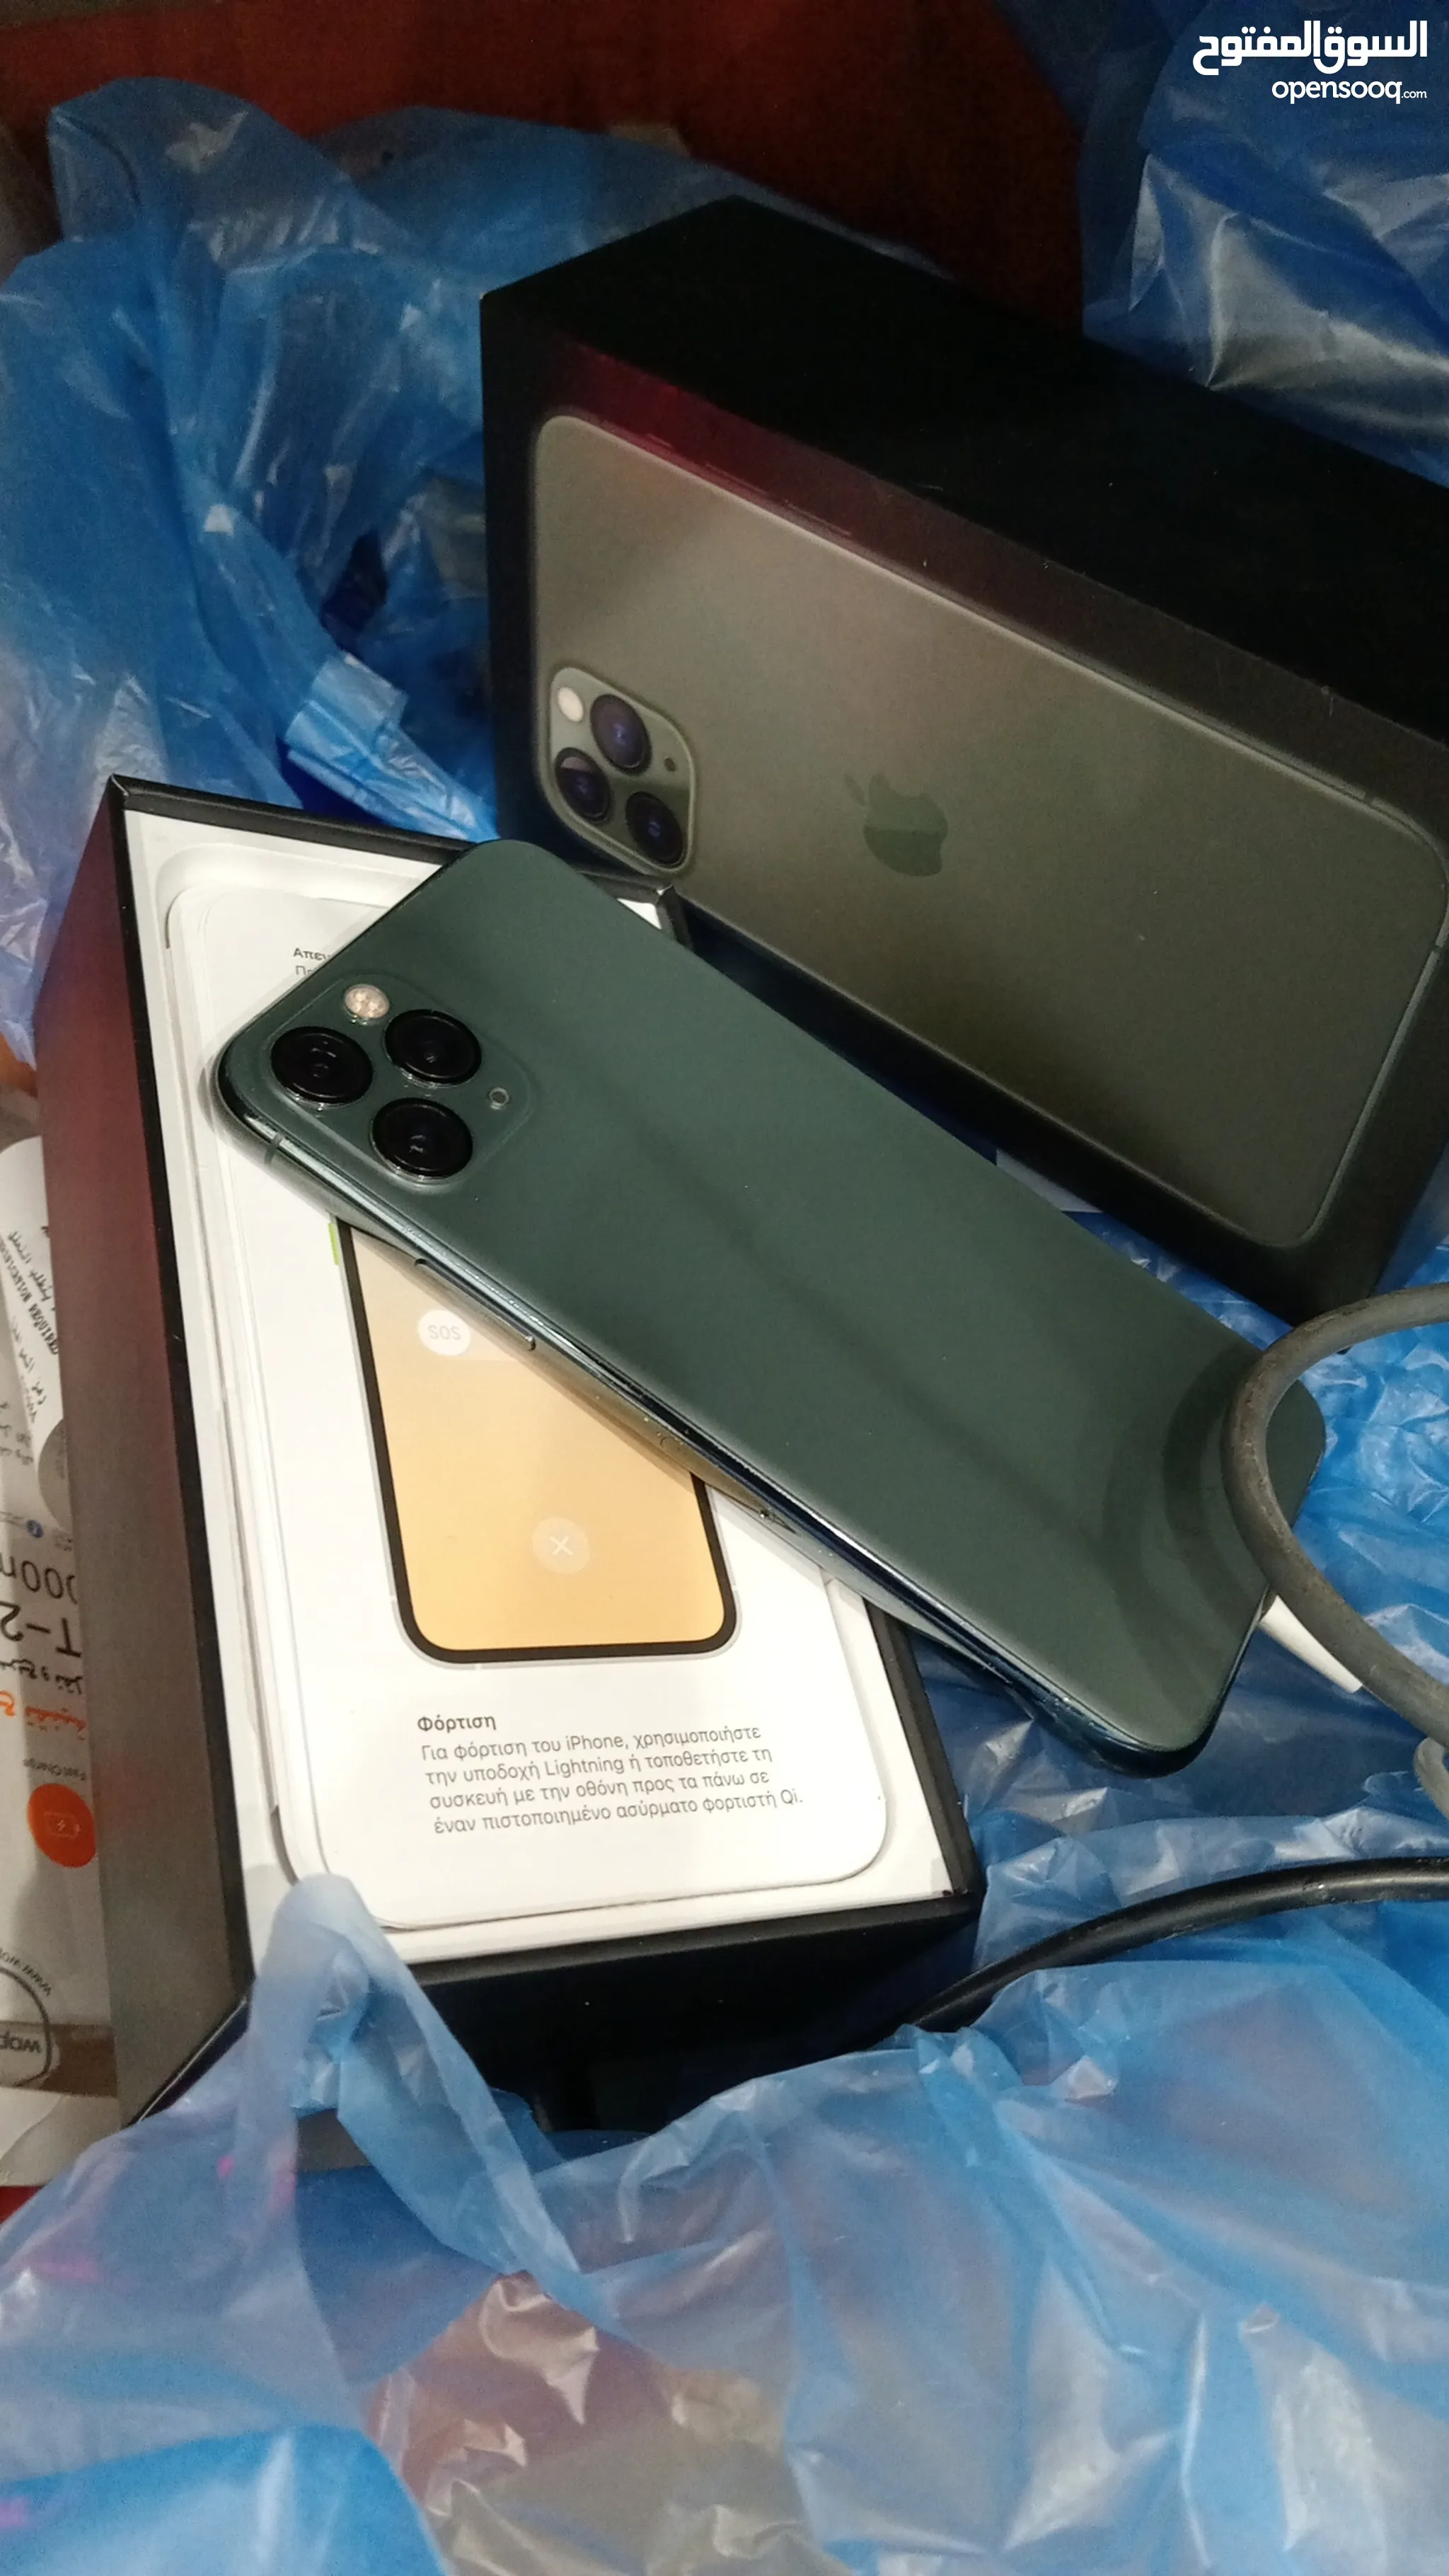 Apple iPhone 11 Pro for Sale in Al Riyadh, Cheapest Apple iPhone 11 Pro |  OpenSooq